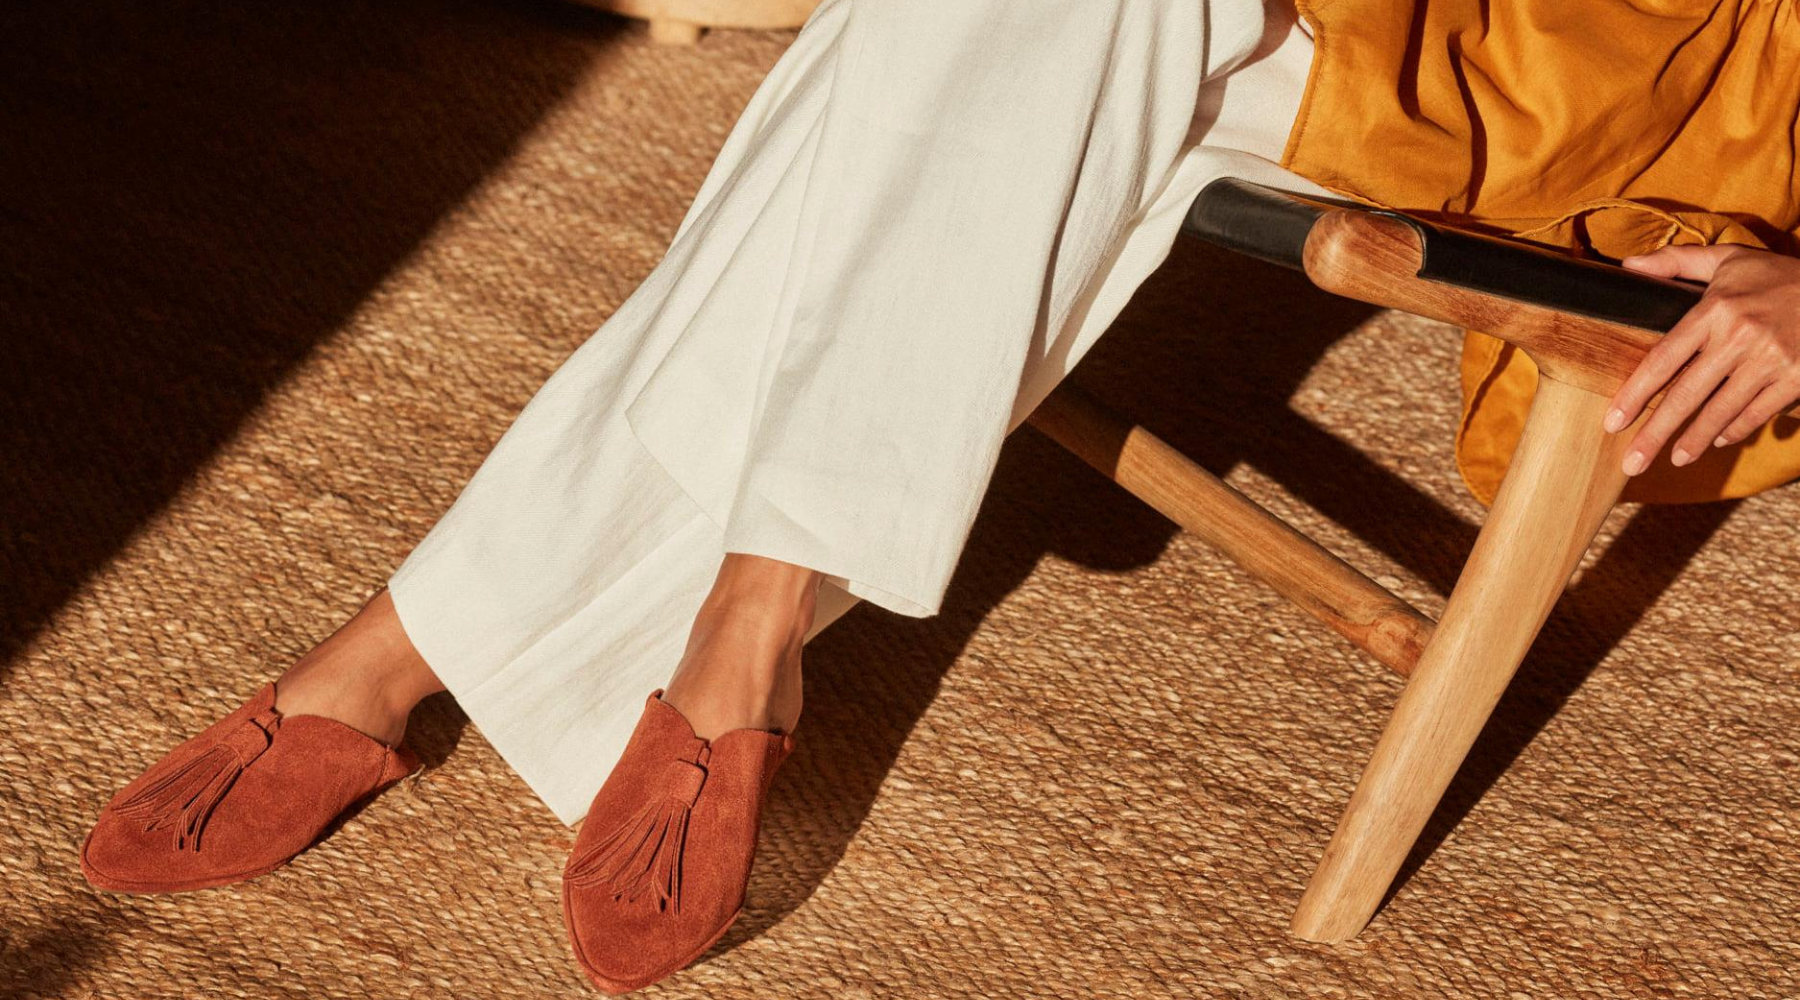 How to Choose the Right Pair of Pedro Garcia Shoes for Your Style and Needs